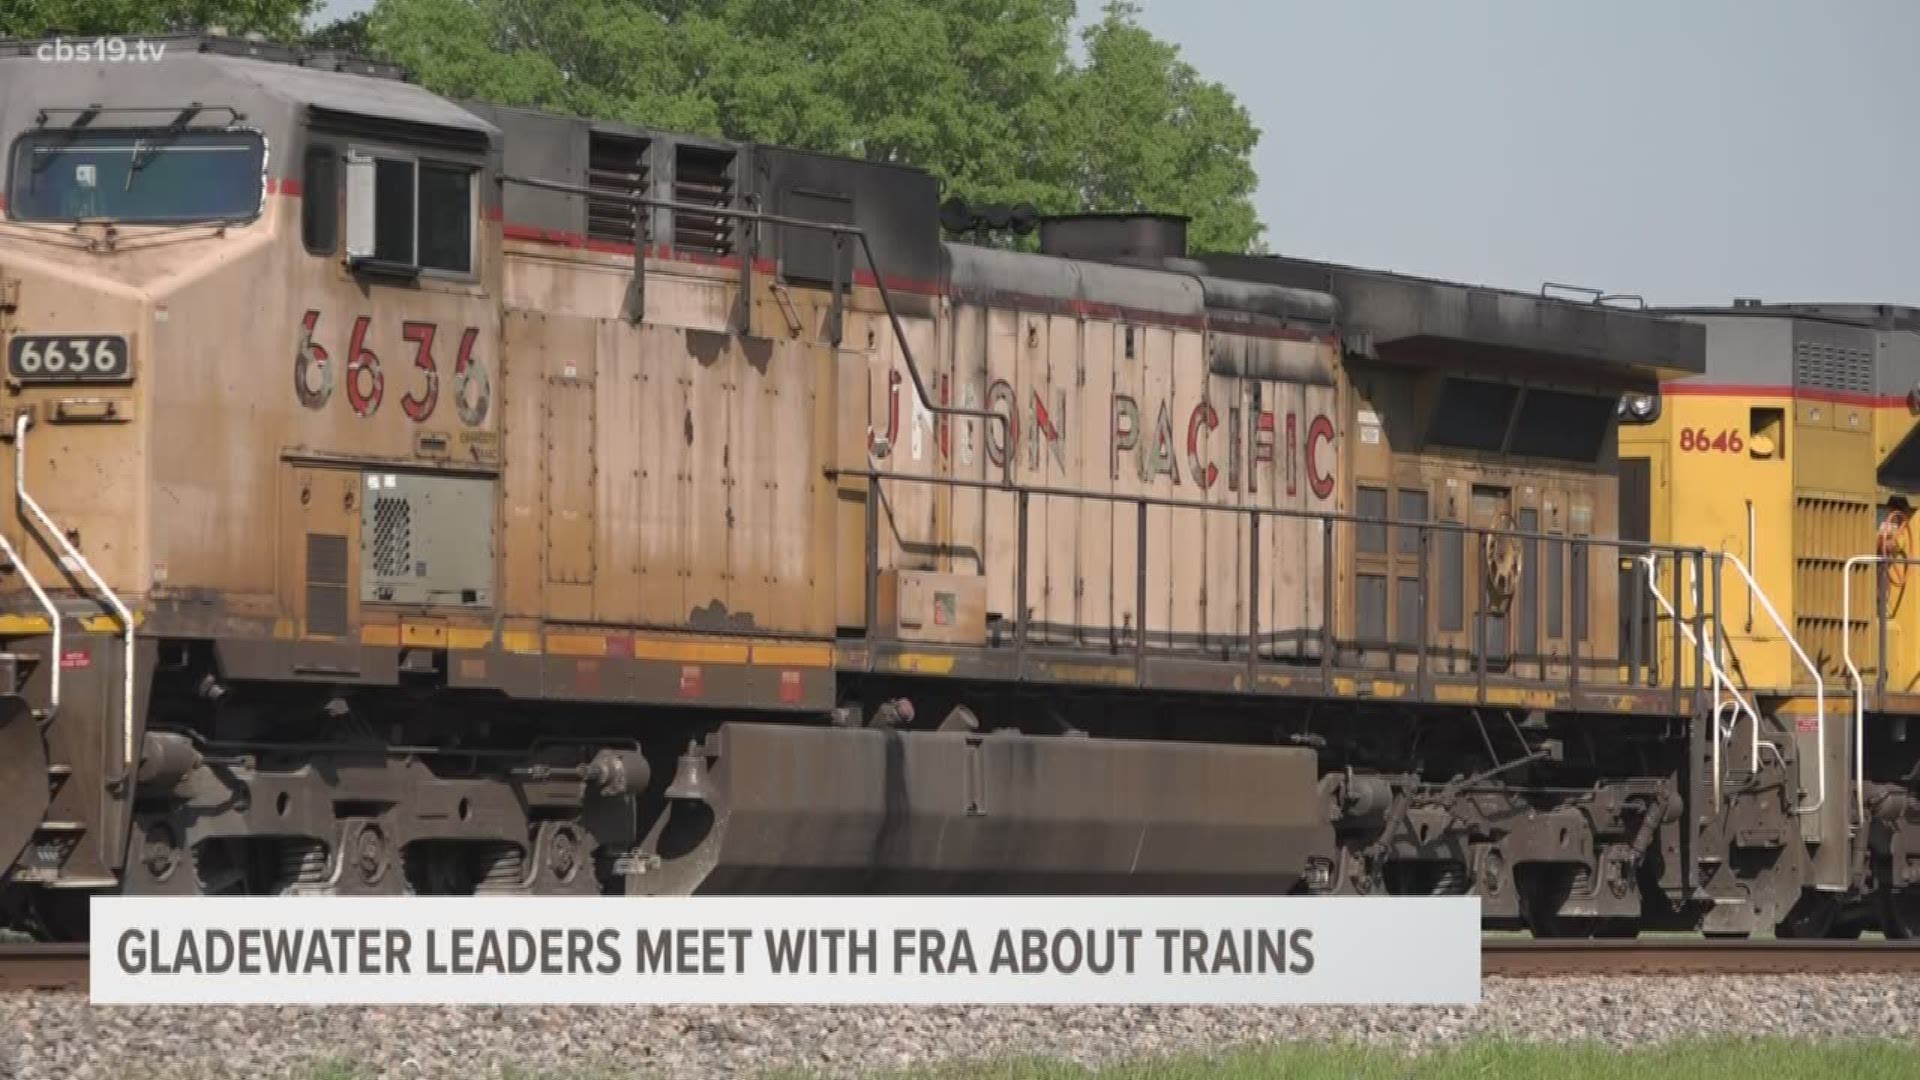 FRA has told Gladewater leaders to begin documenting when an Union Pacific train blocks the Gregory Lane crossing for an extended period of time. FRA says it will begin fining Union Pacific or the conductor.